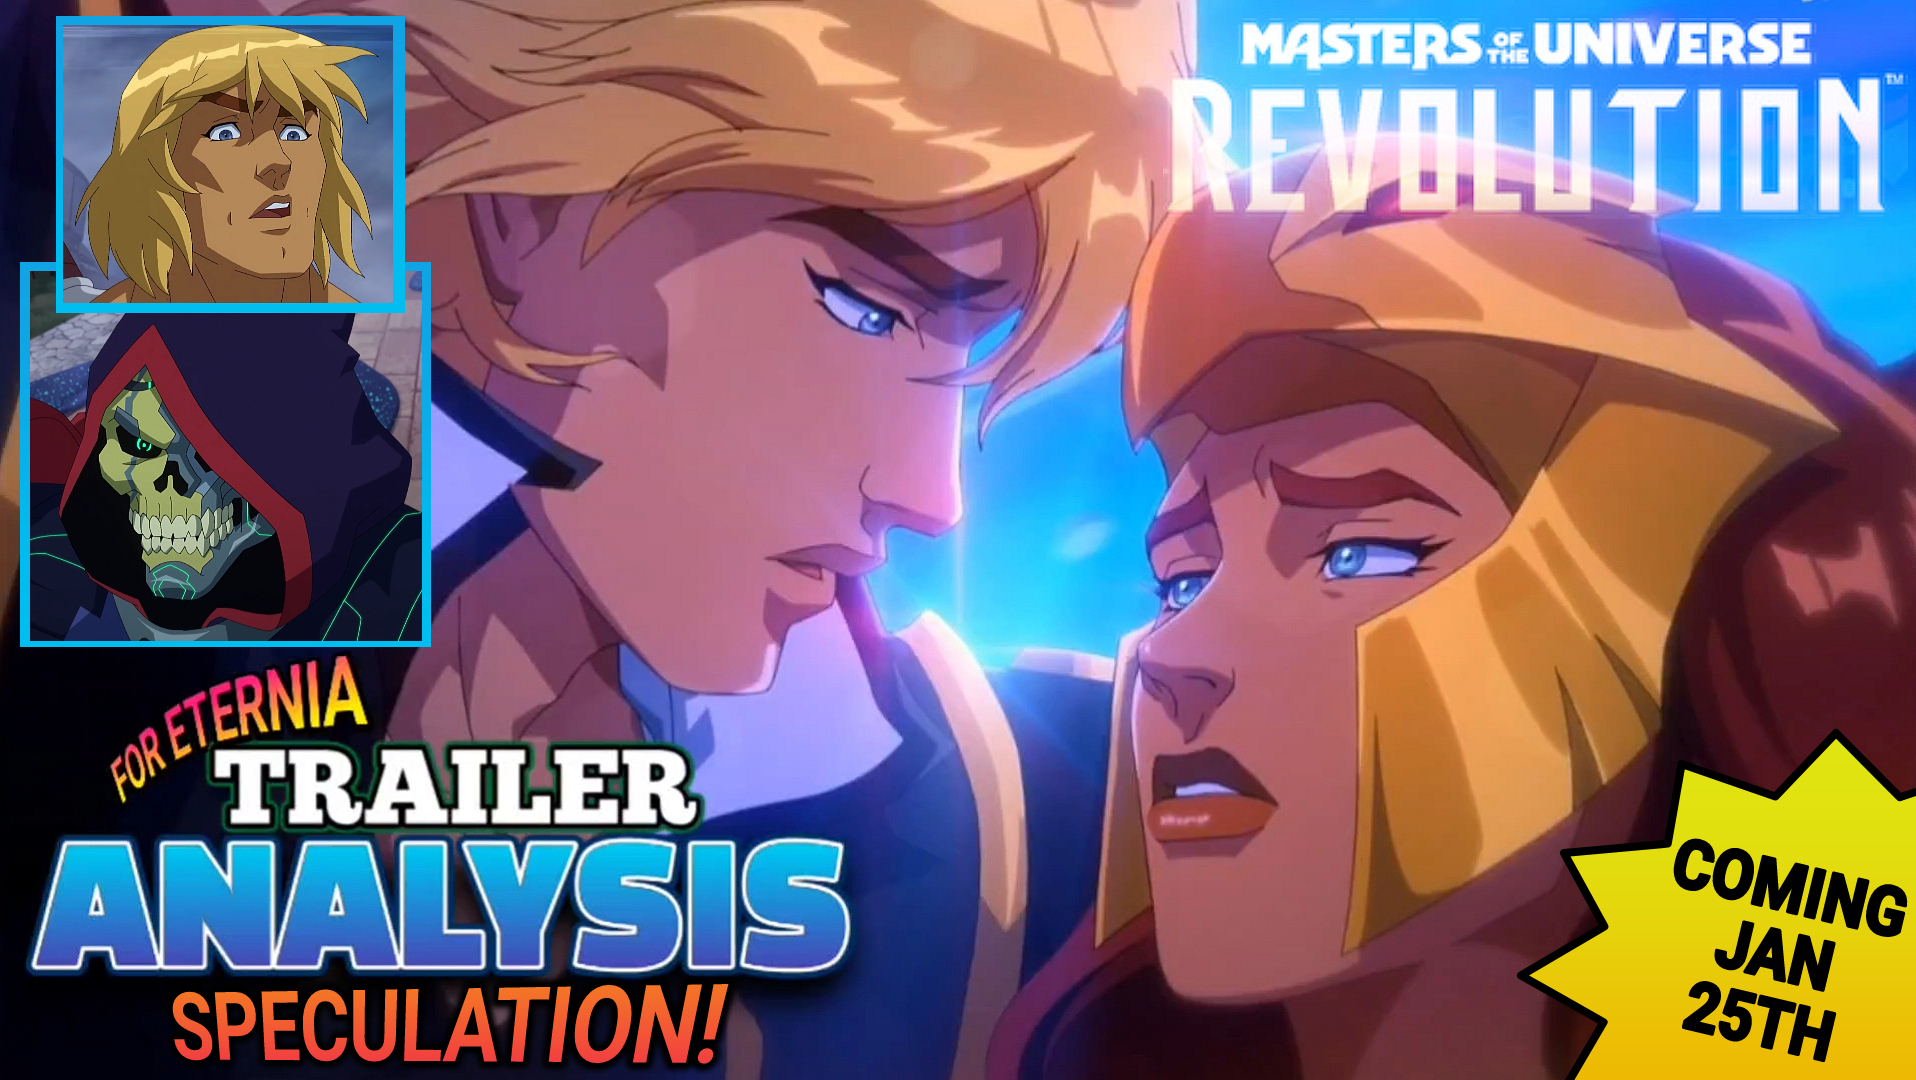 TRAILER ANALYSIS: Analyzing the ”Masters of the Universe: Revolution” Full Trailer